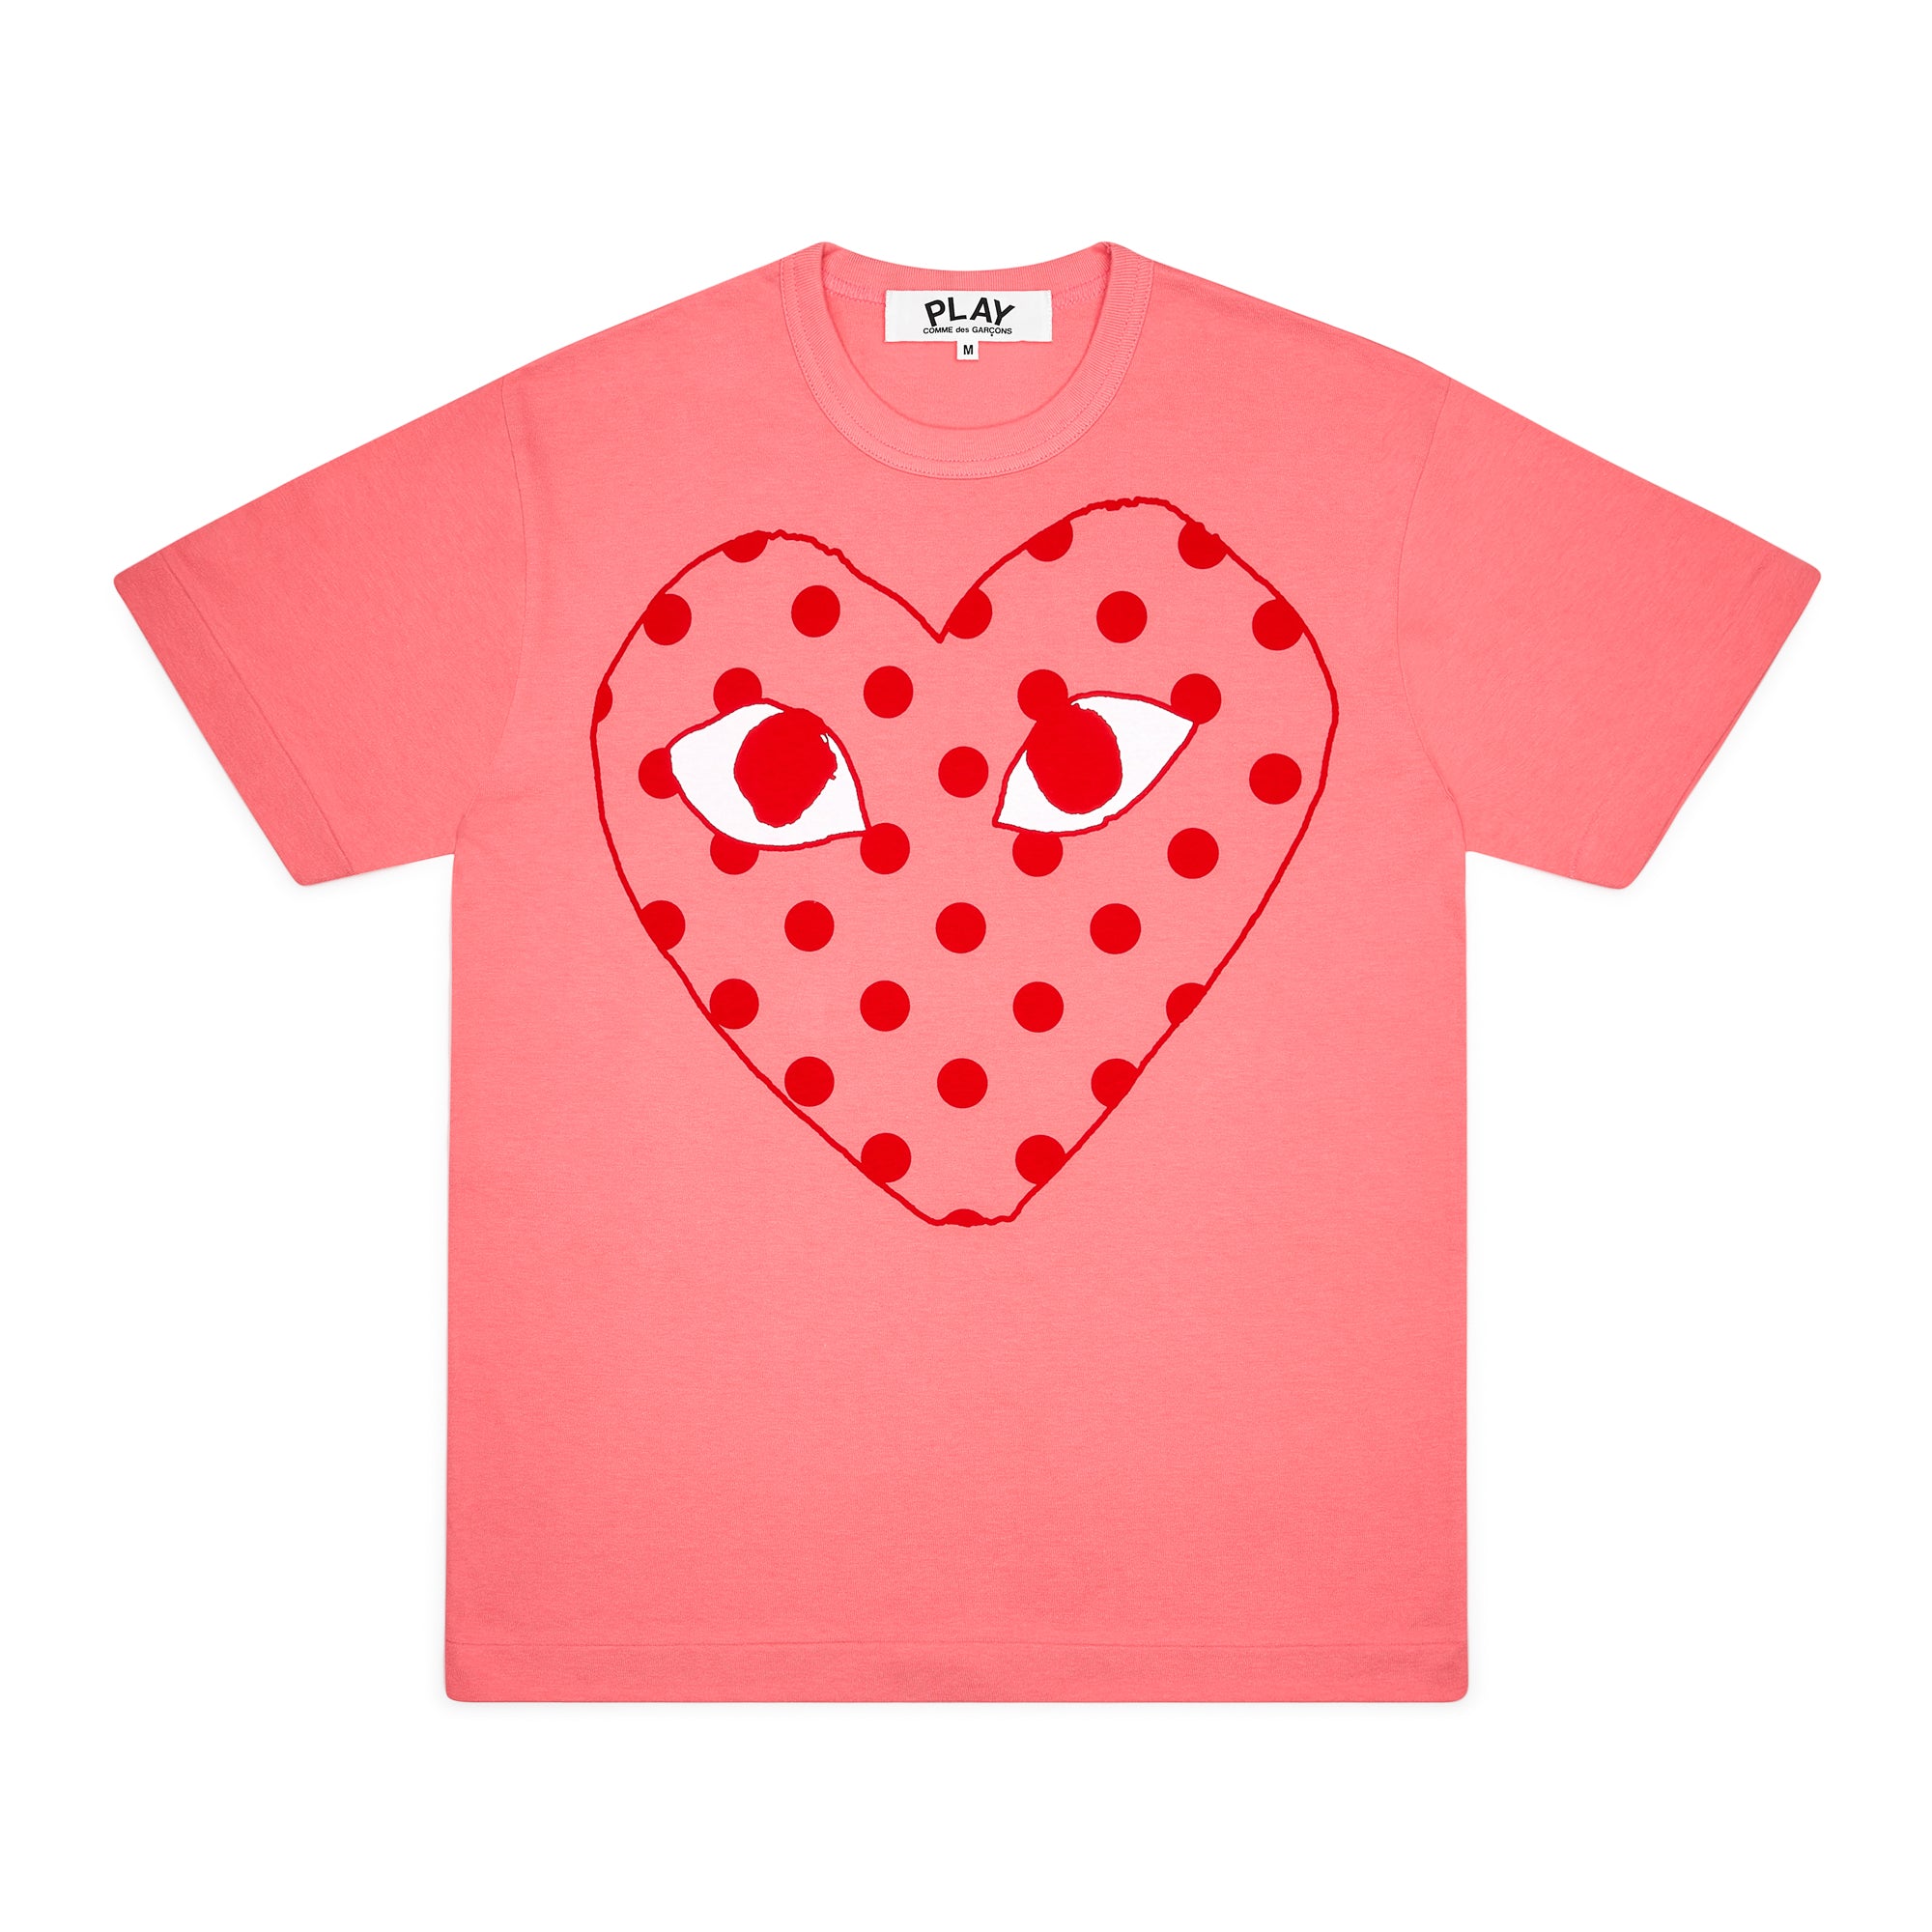 Play Comme des Garçons - Bright Spotted Heart T-Shirt - (Pink) view 1